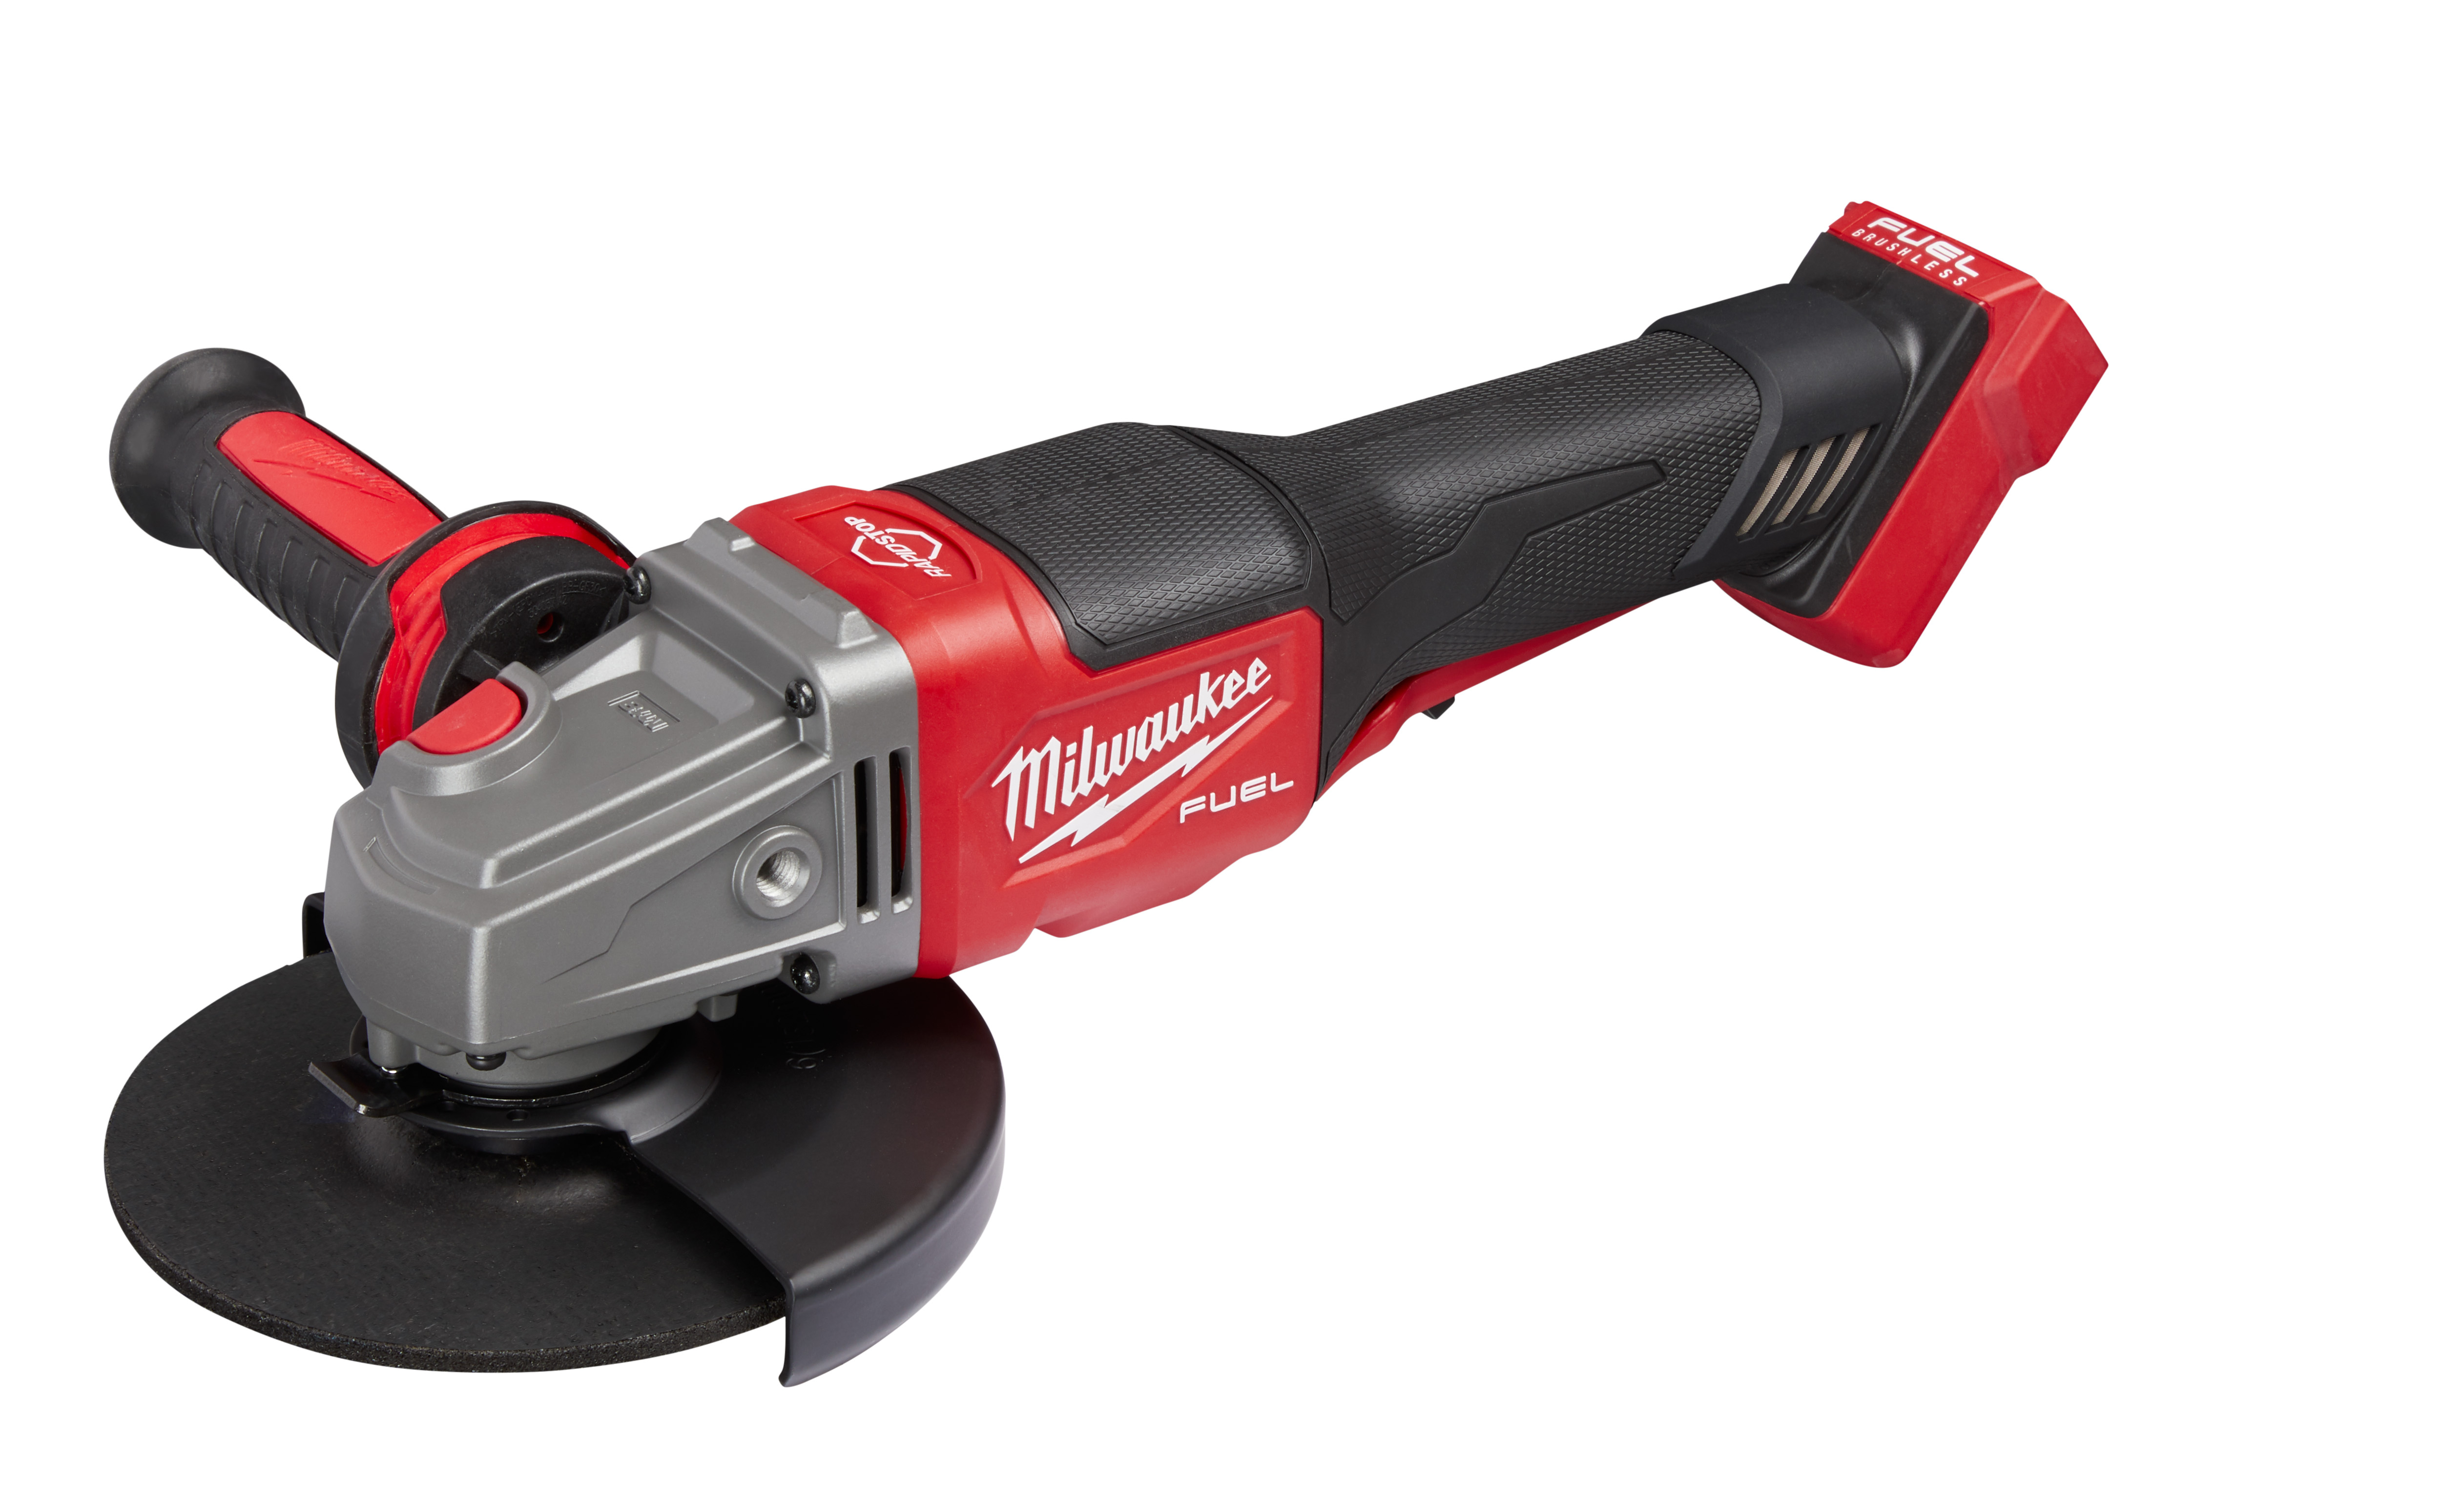 M18 FUEL 18 Volt Lithium-Ion Cordless 4-1/2 in.-6 in. No Lock Braking Grinder with Paddle Switch - Tool Only